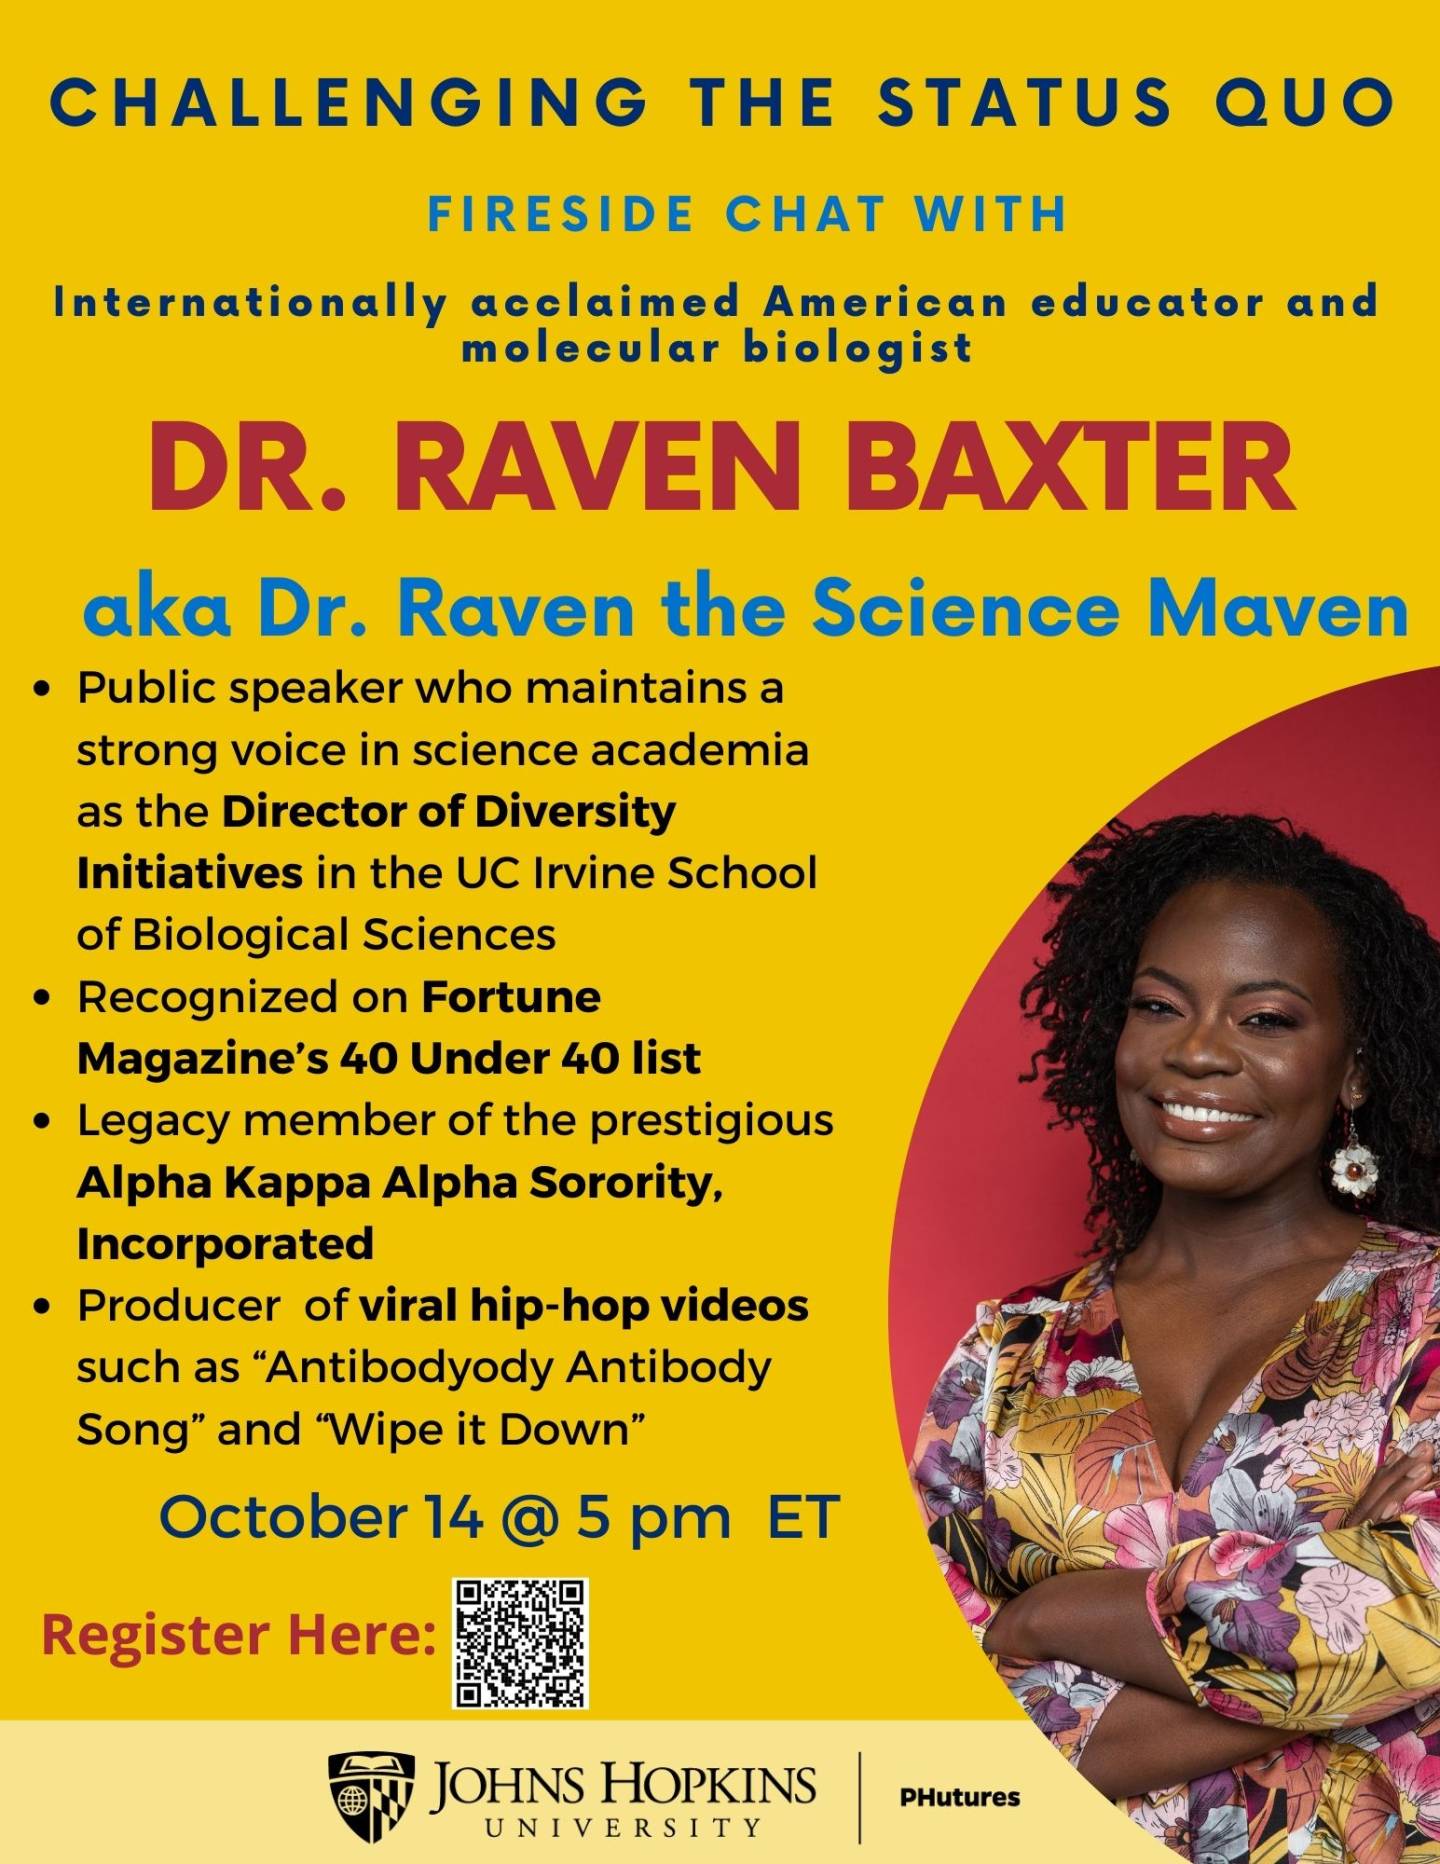 Fireside chat with Dr. Raven "The Science Maven" Baxter Hub